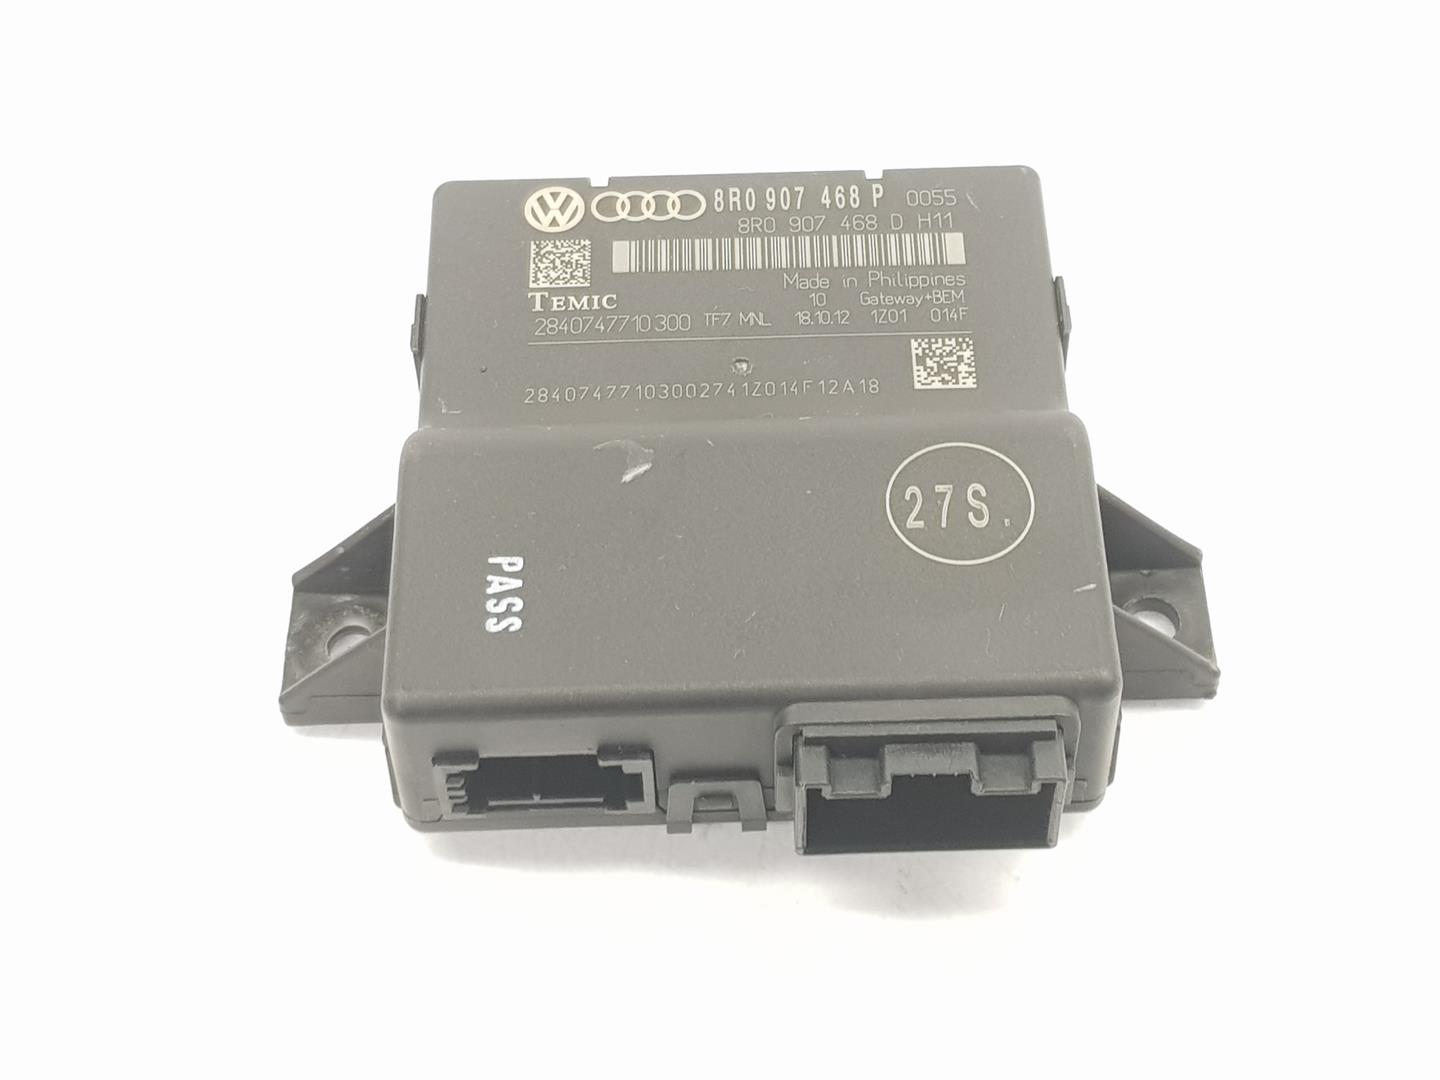 AUDI RS 4 B8 (2012-2020) Other Control Units 8R0907468P, 8R0907468P 22525435